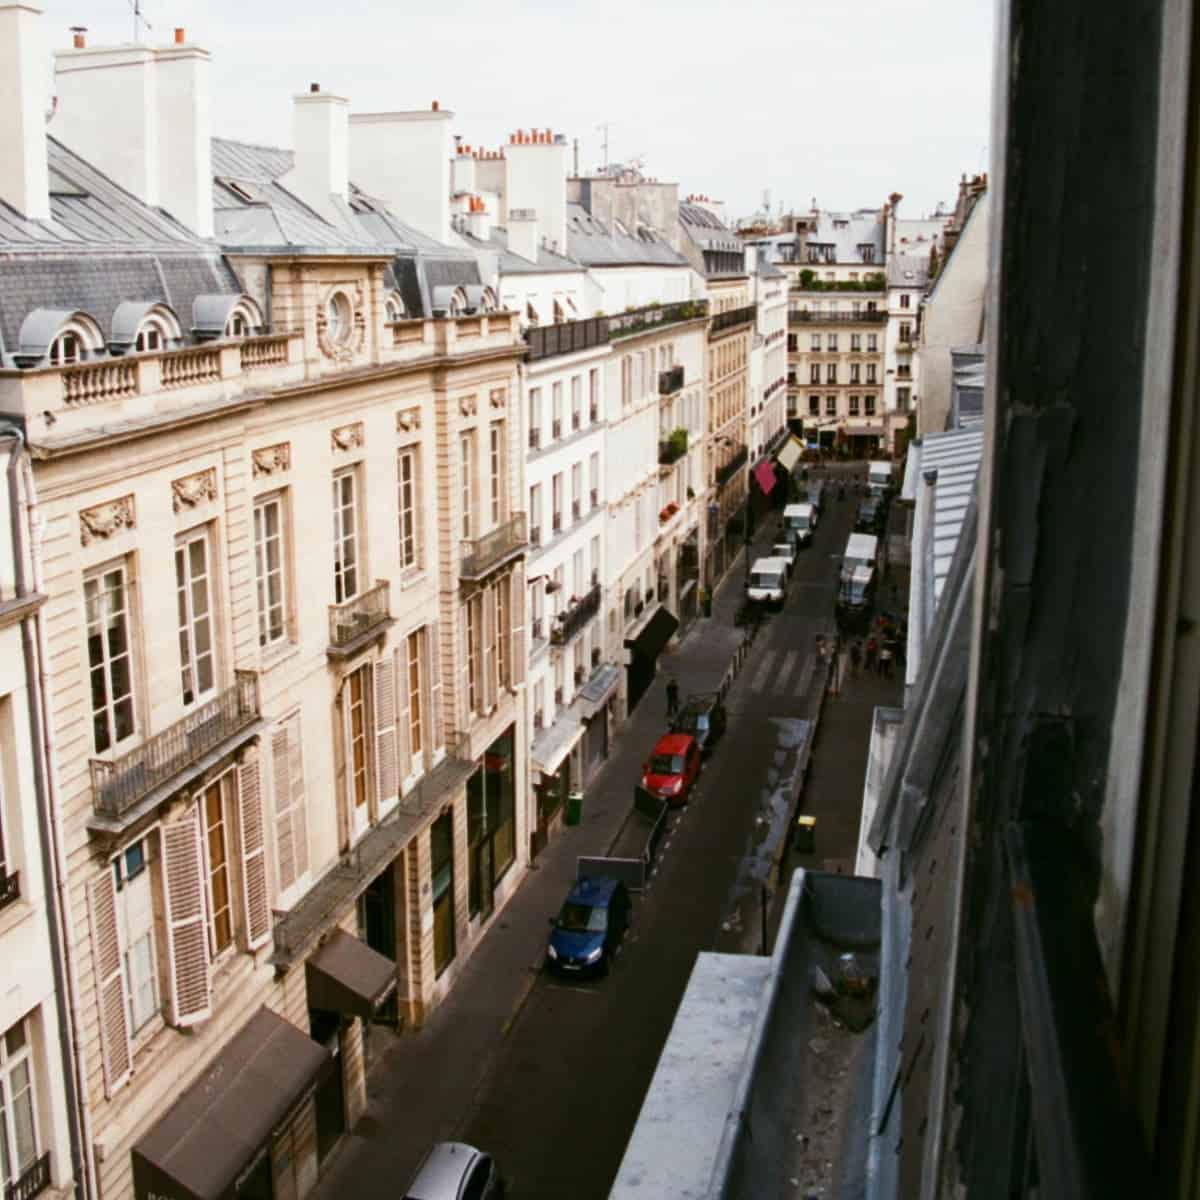 A window view of Paris streets